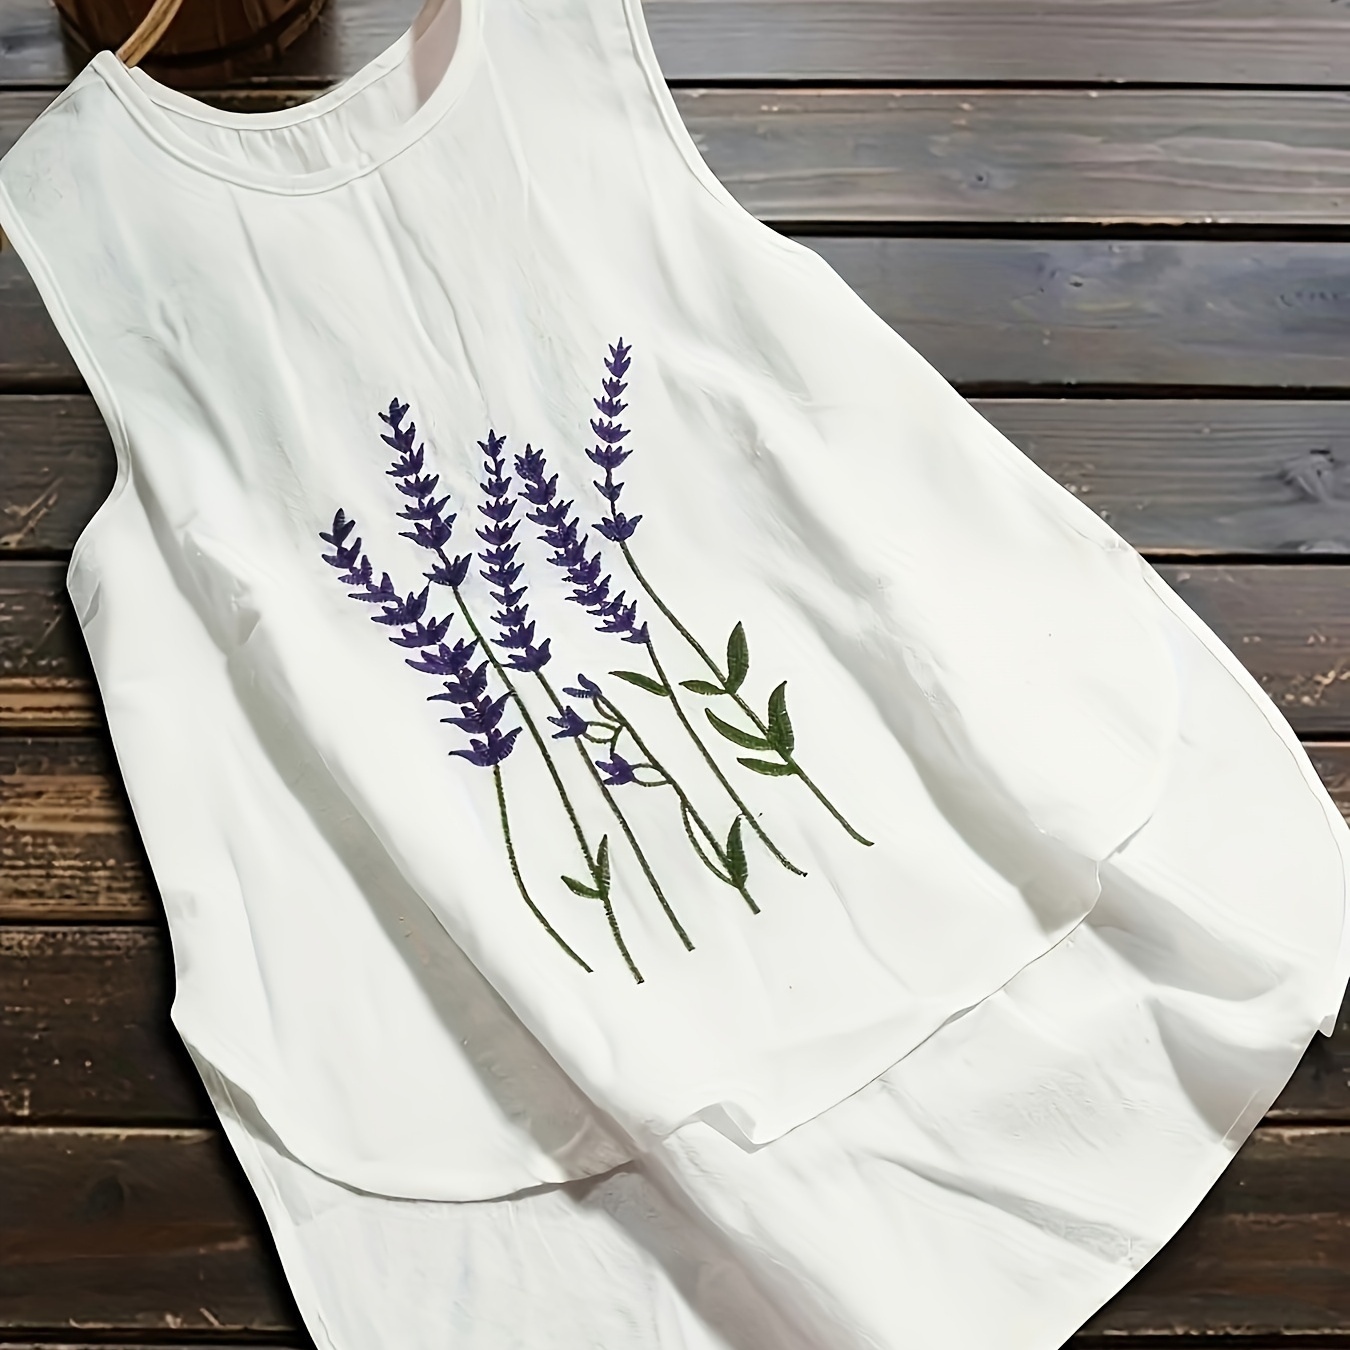 

Floral Embroidered High Low Hem Tank Top, Casual Crew Neck Sleeveless Tank Top For Summer, Women's Clothing